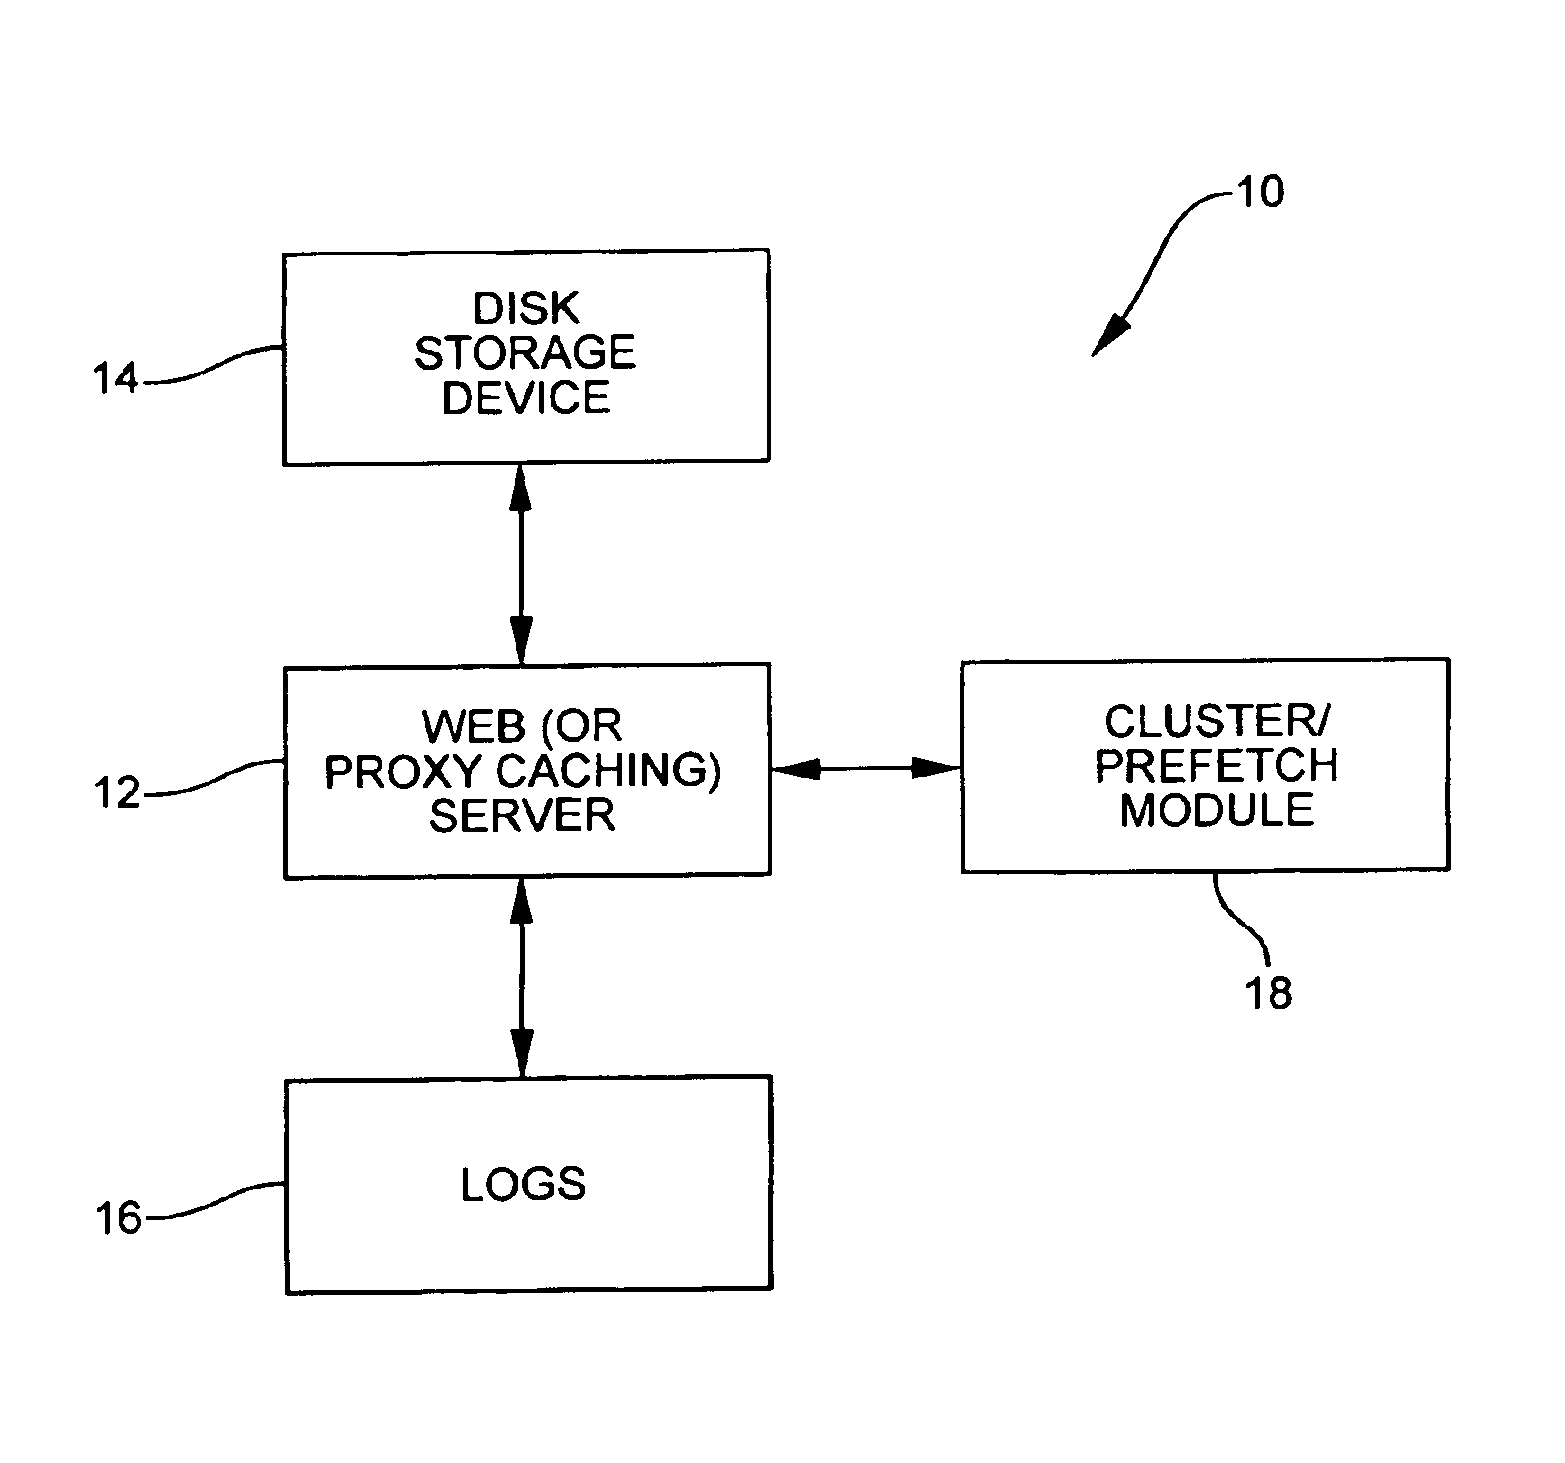 Methods and apparatus for clustering and prefetching data objects